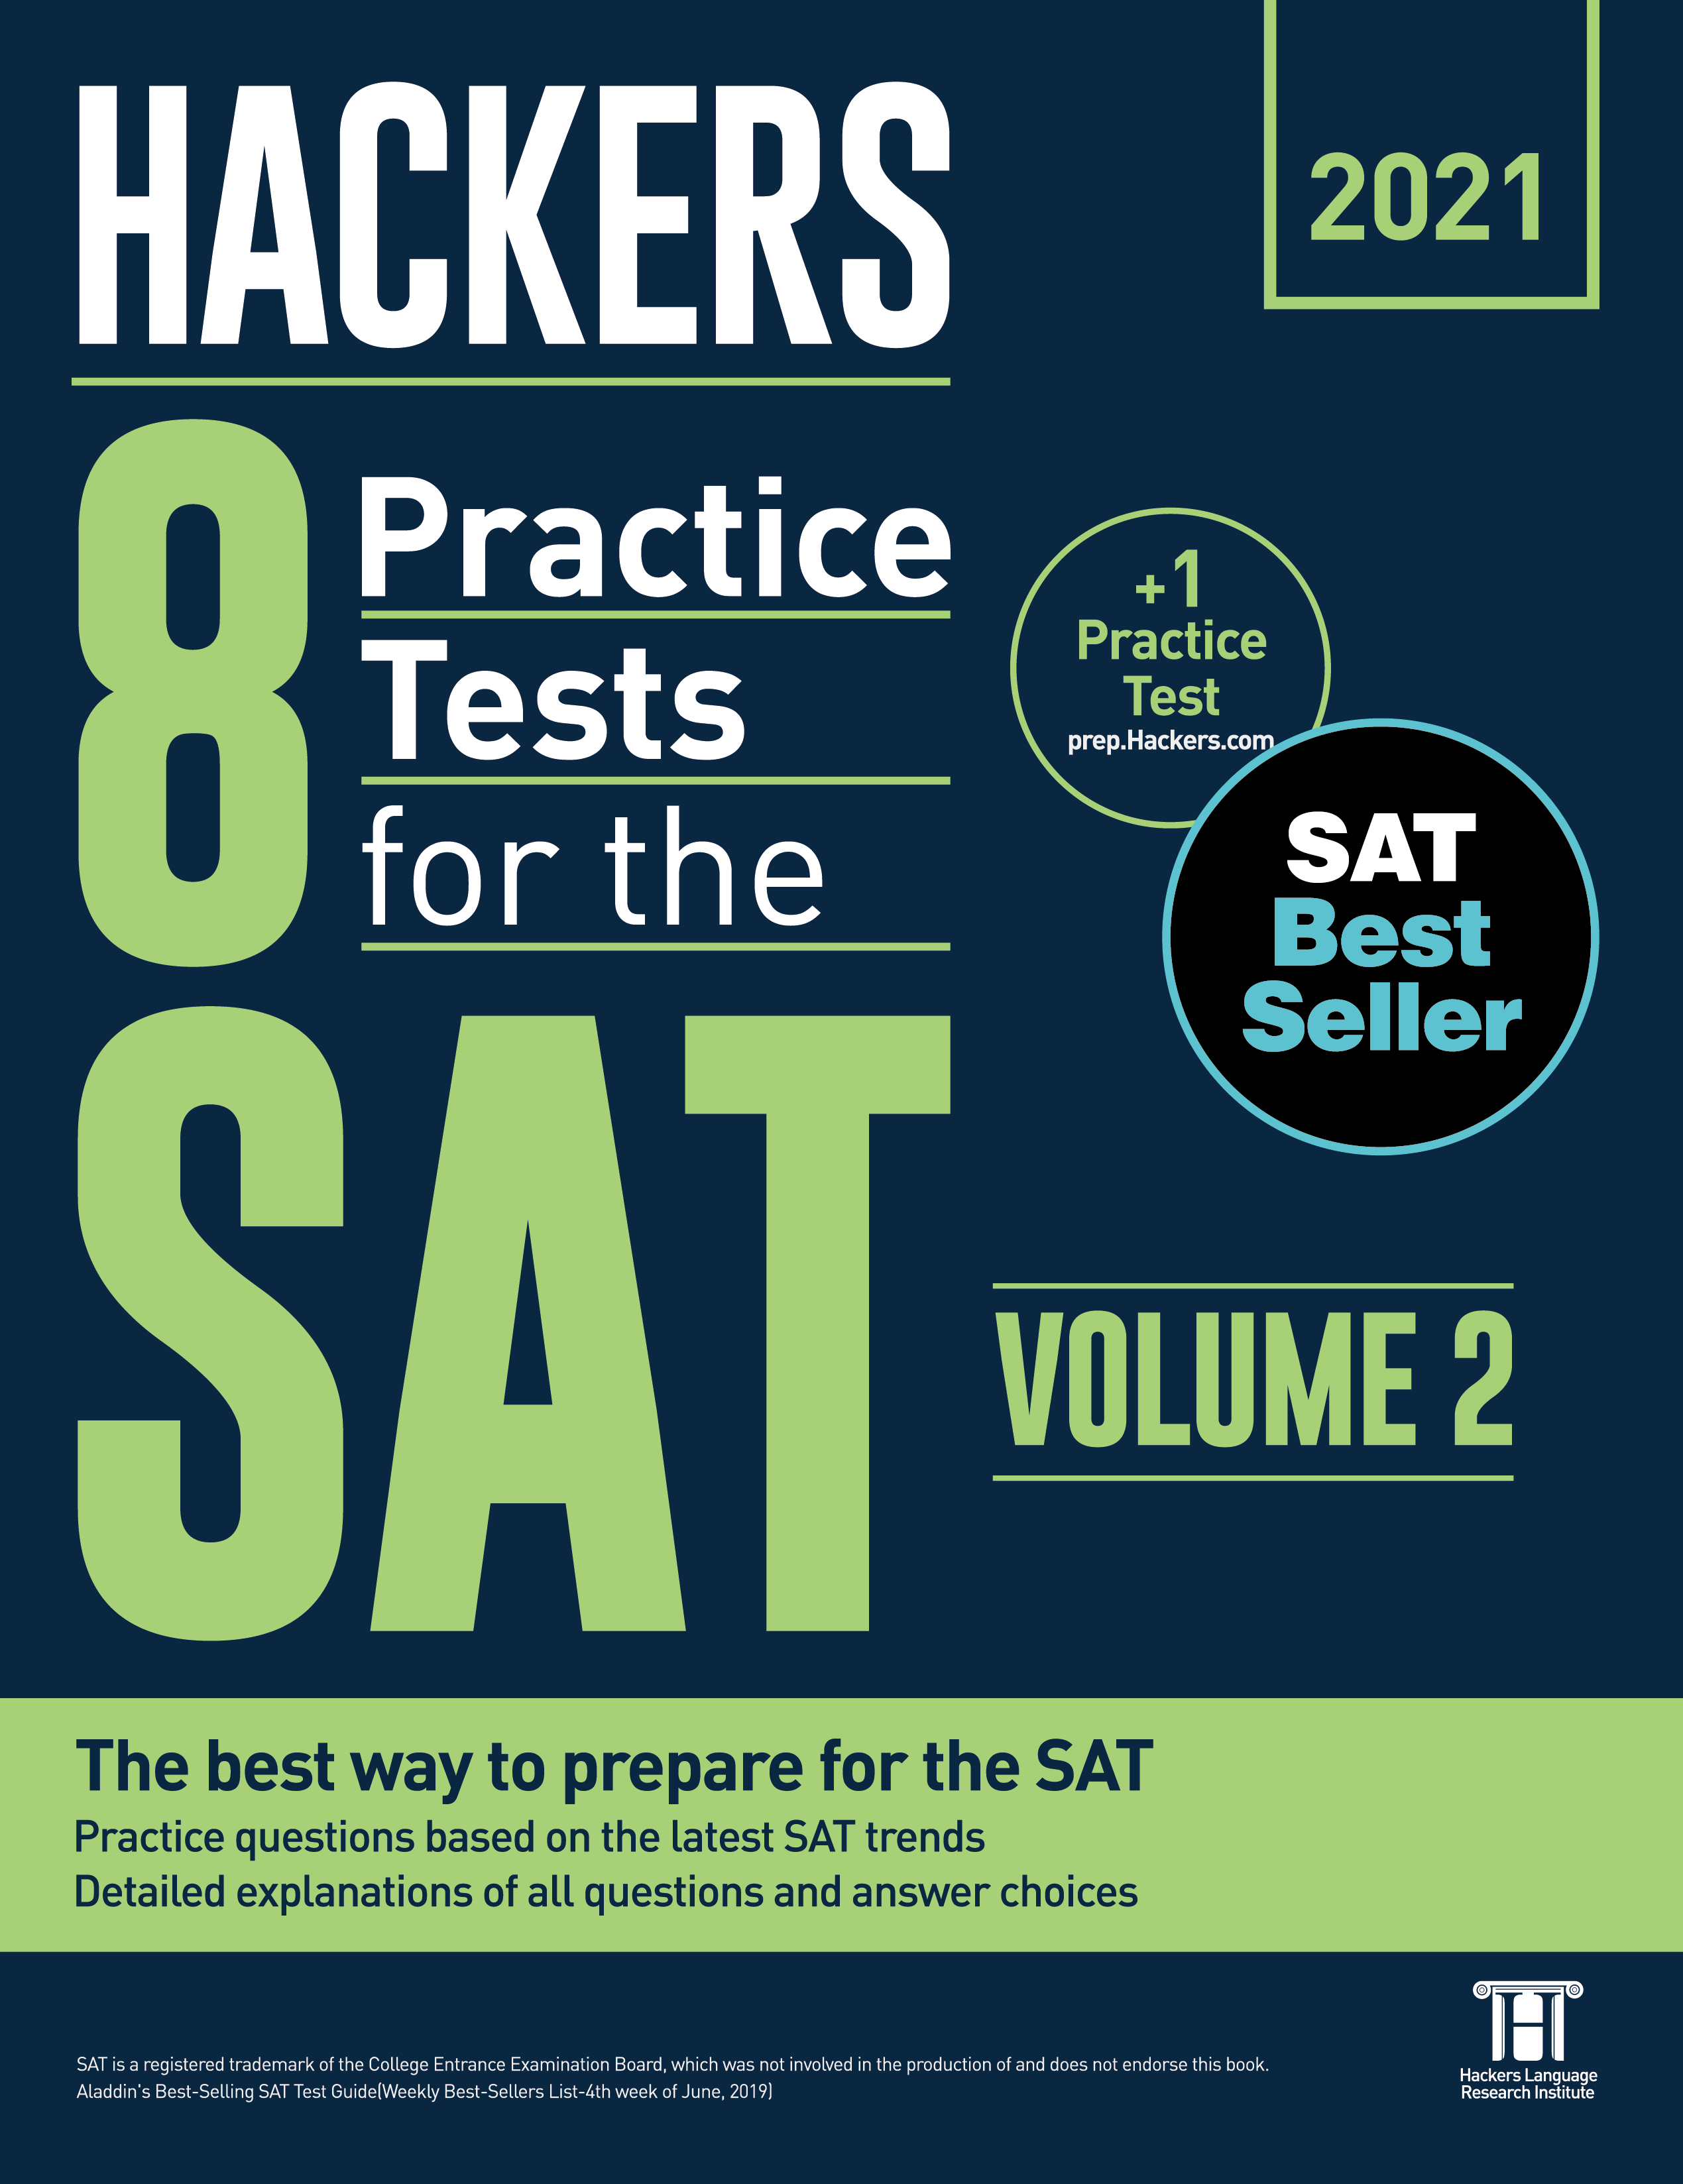 Hackers 8 Practice Tests for the SAT 2